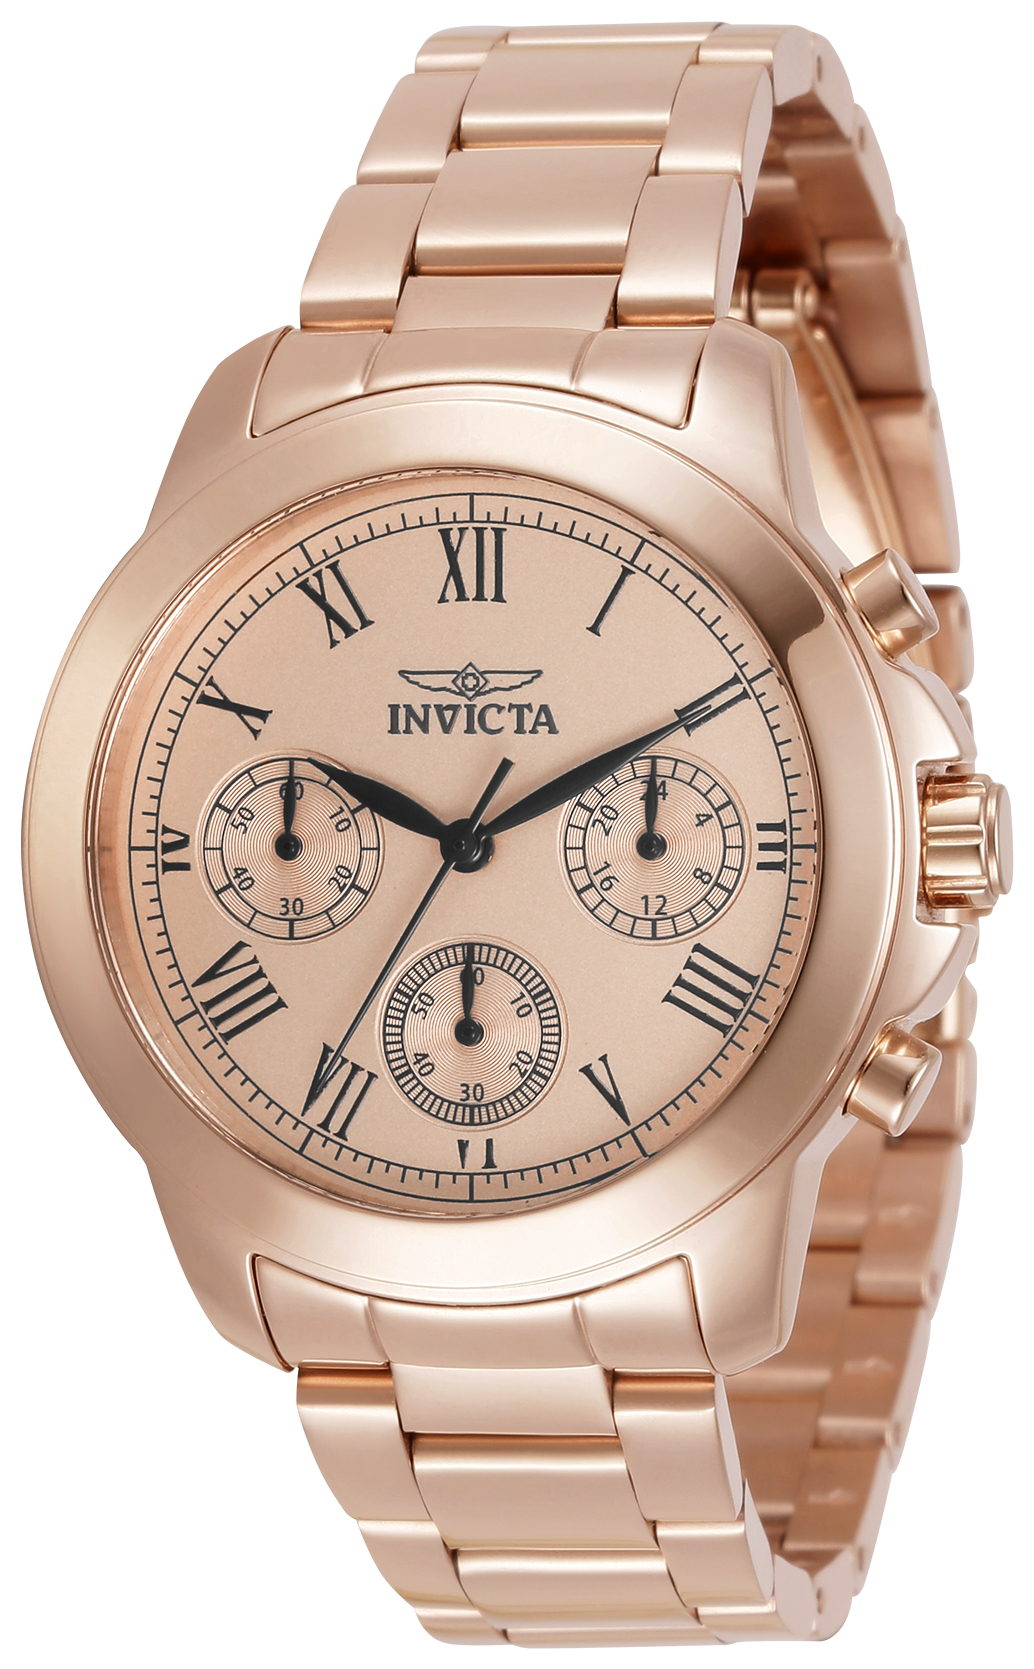 Invicta Specialty Women's Watch - 37mm, Rose Gold (34422)